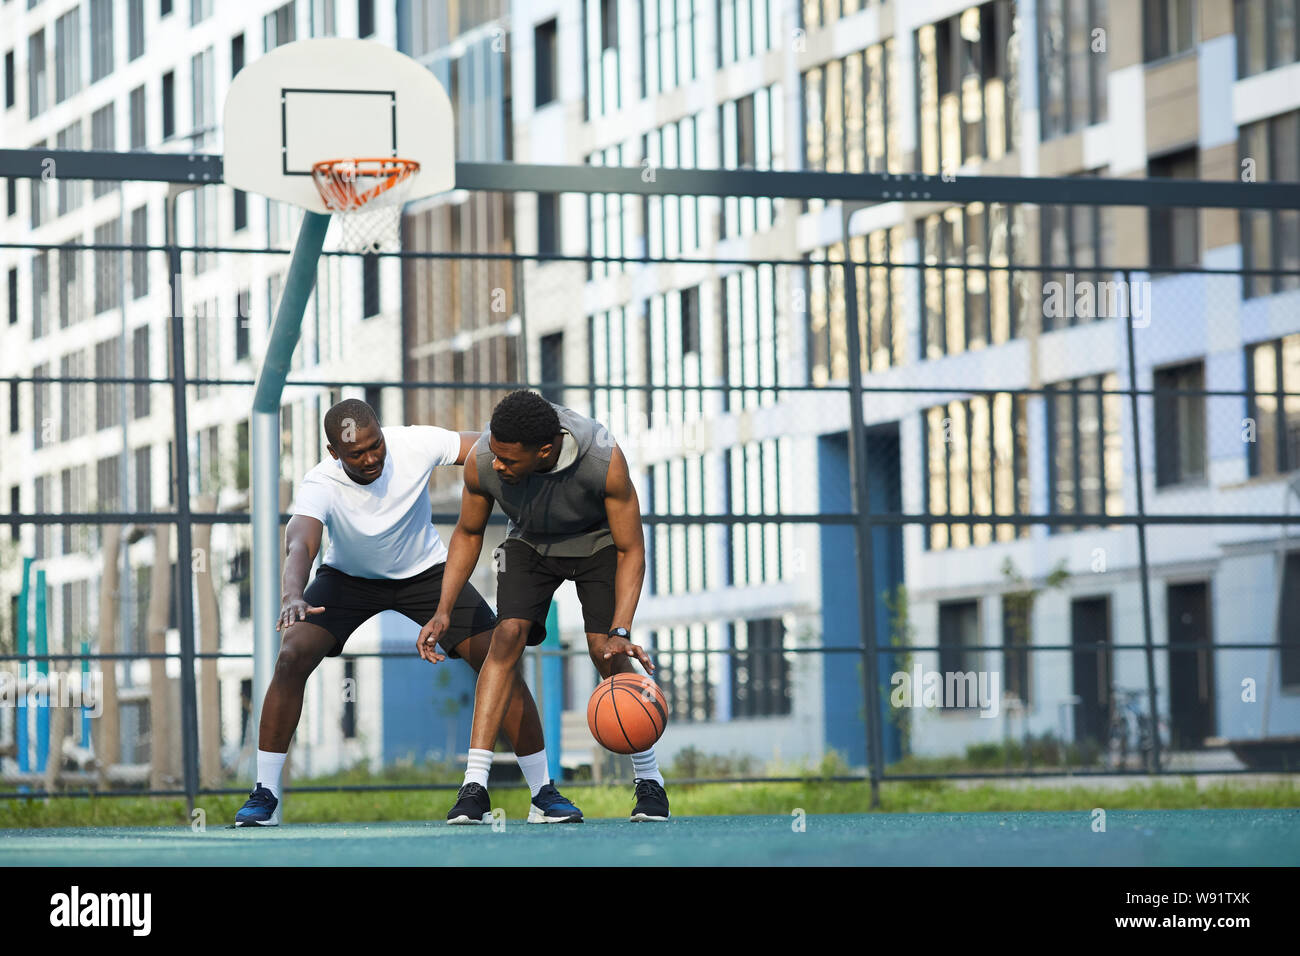 Full length action shot of two African-American guys playing basketball in outdoor court in urban setting, copy space Stock Photo